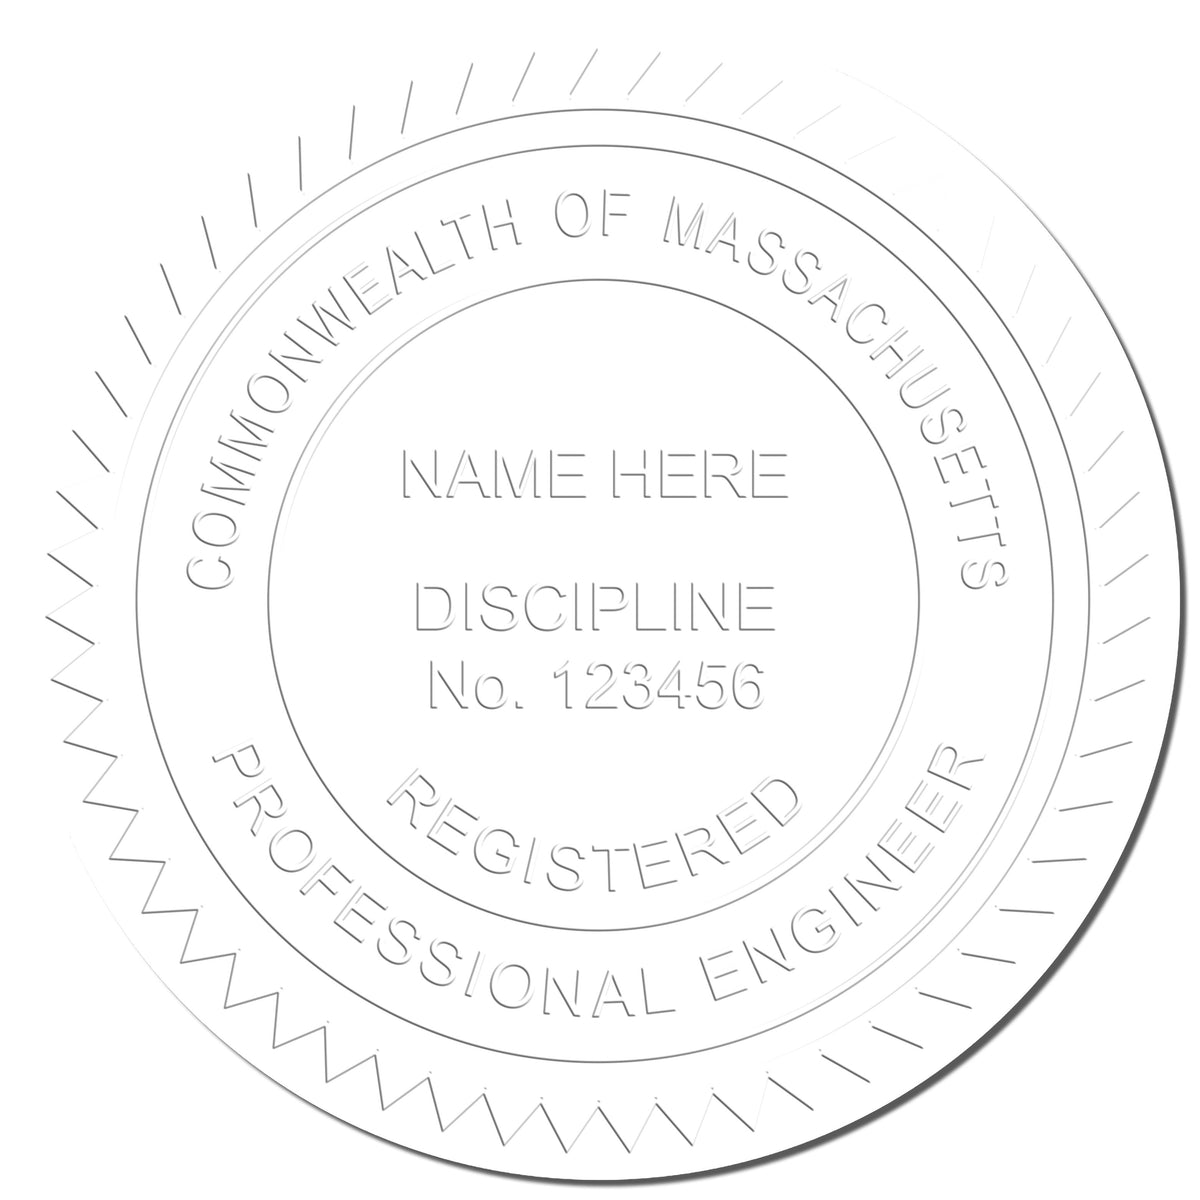 A photograph of the Handheld Massachusetts Professional Engineer Embosser stamp impression reveals a vivid, professional image of the on paper.